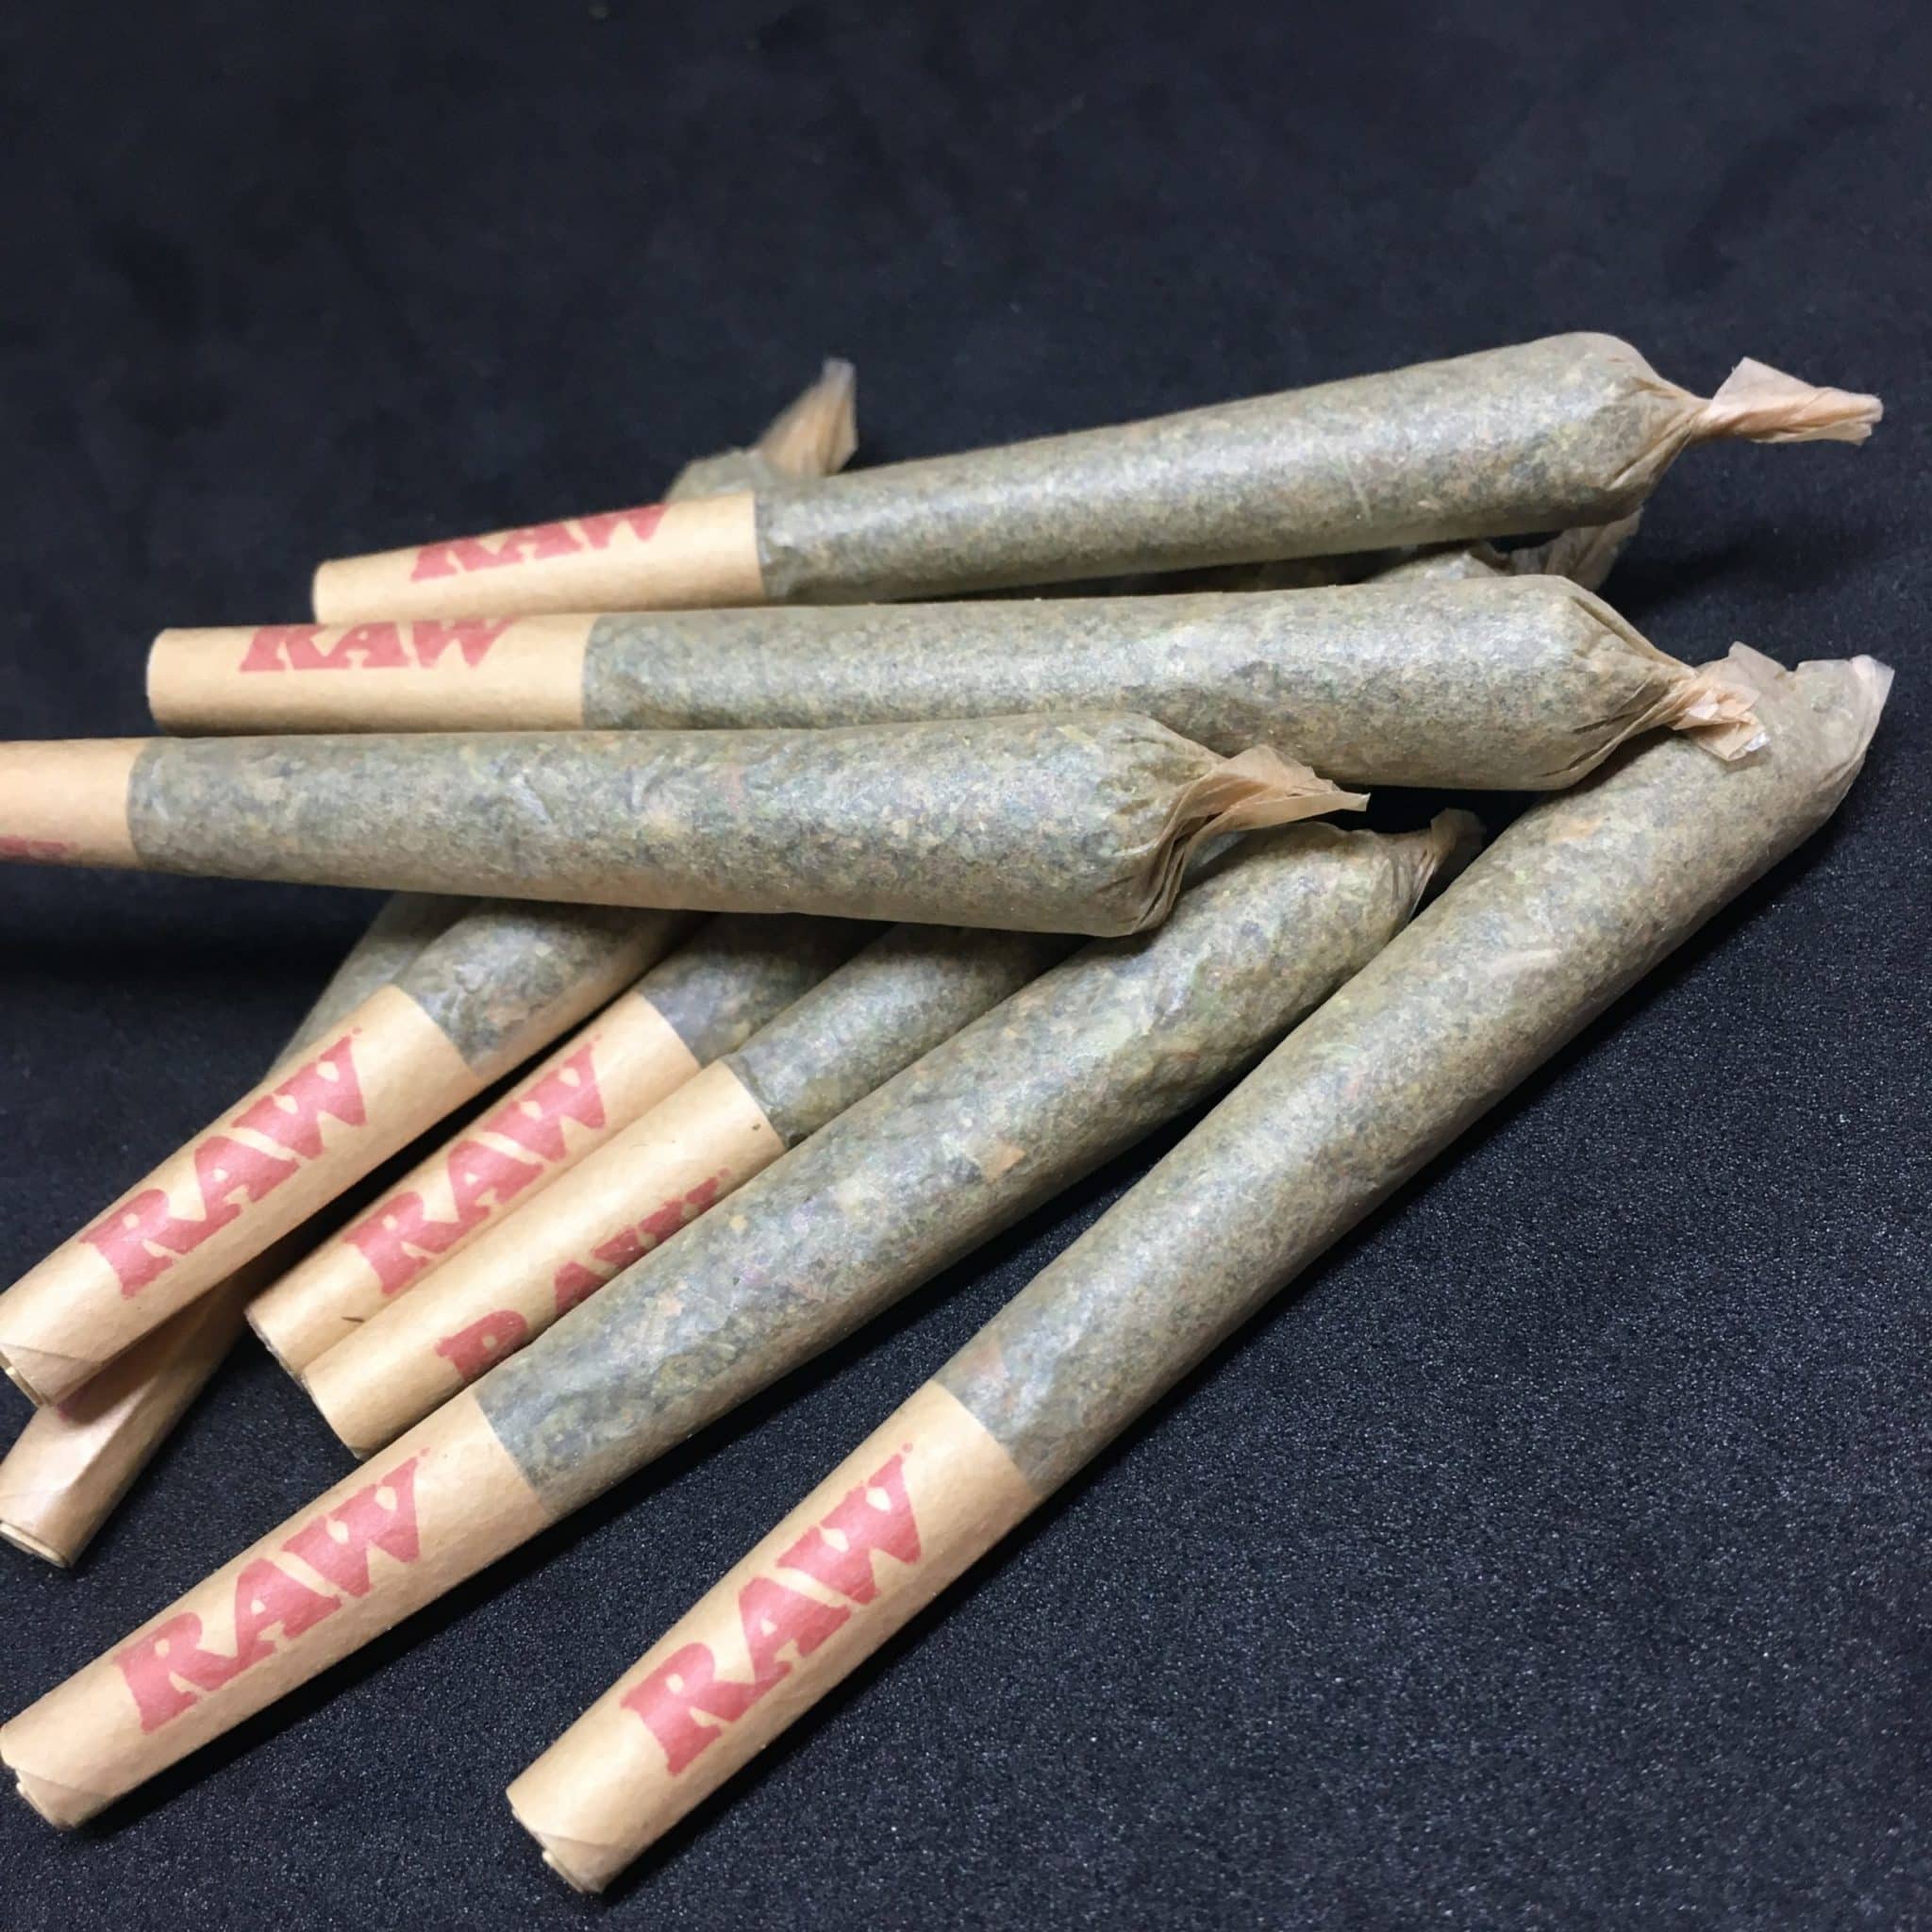 0.6g preroll small many scaled - St. Patrick's Day